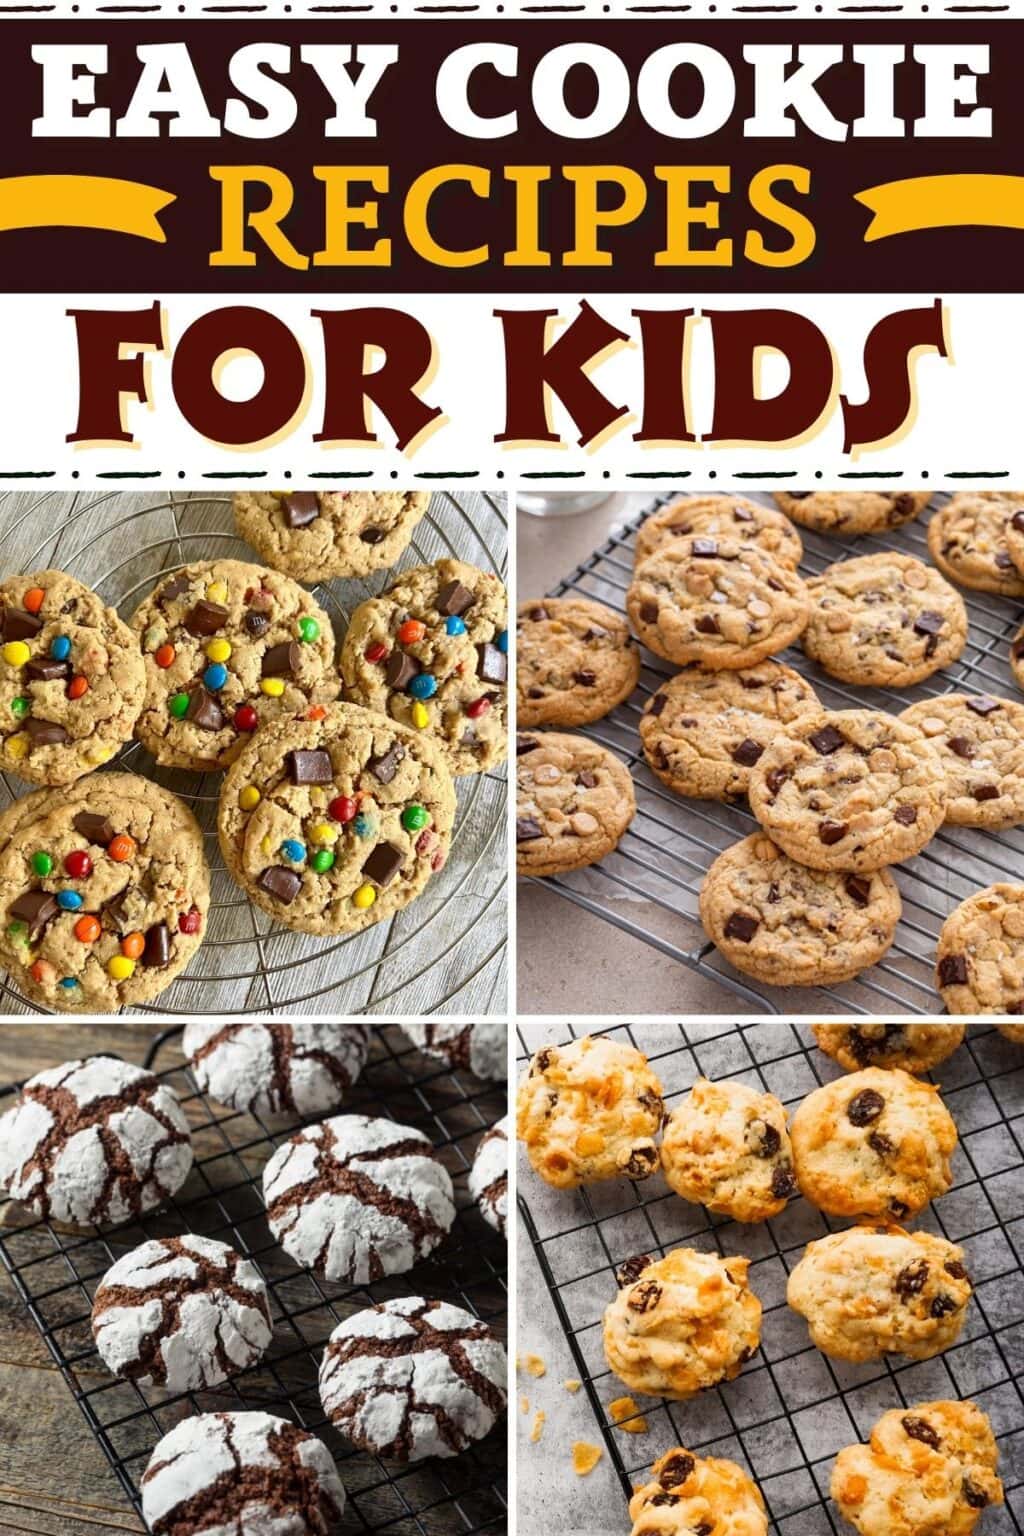 25 Easy Cookie Recipes for Kids - Insanely Good